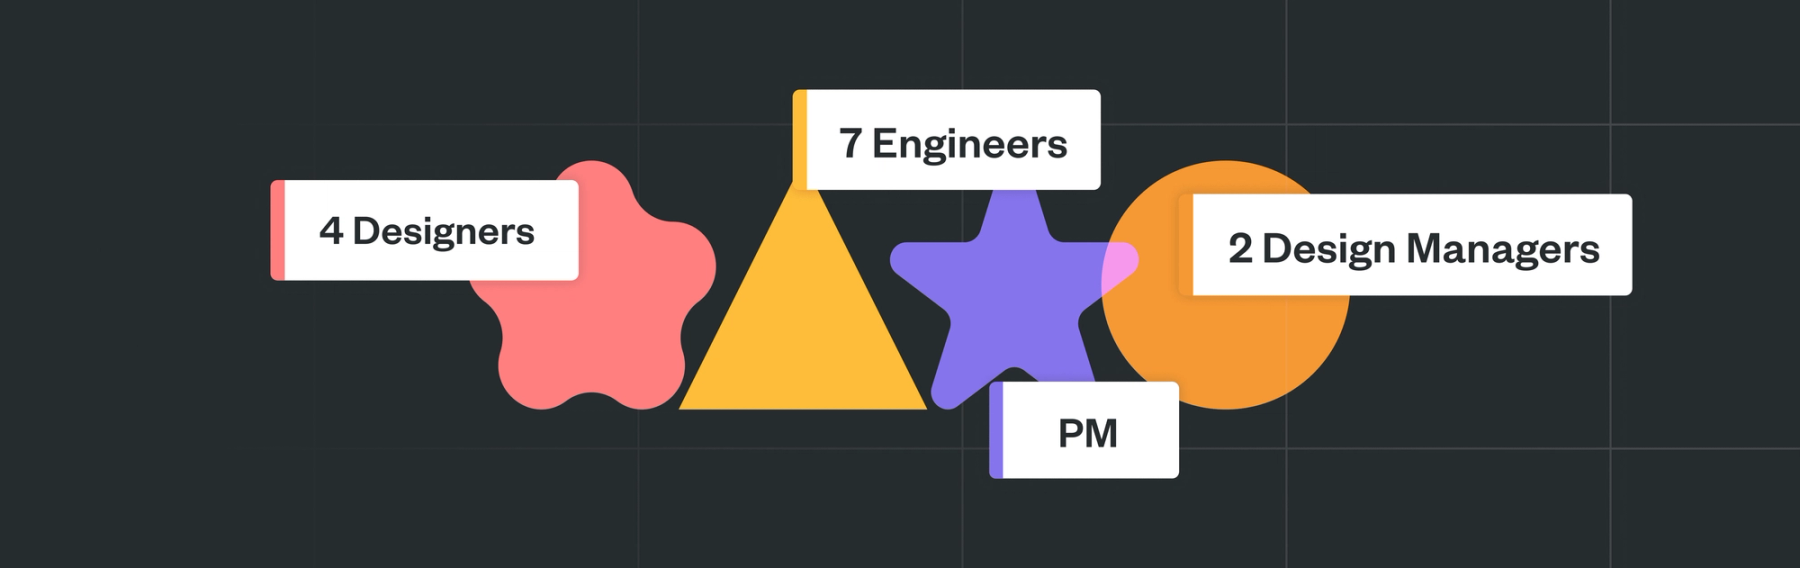 Design system team structure for Workday's Canvas